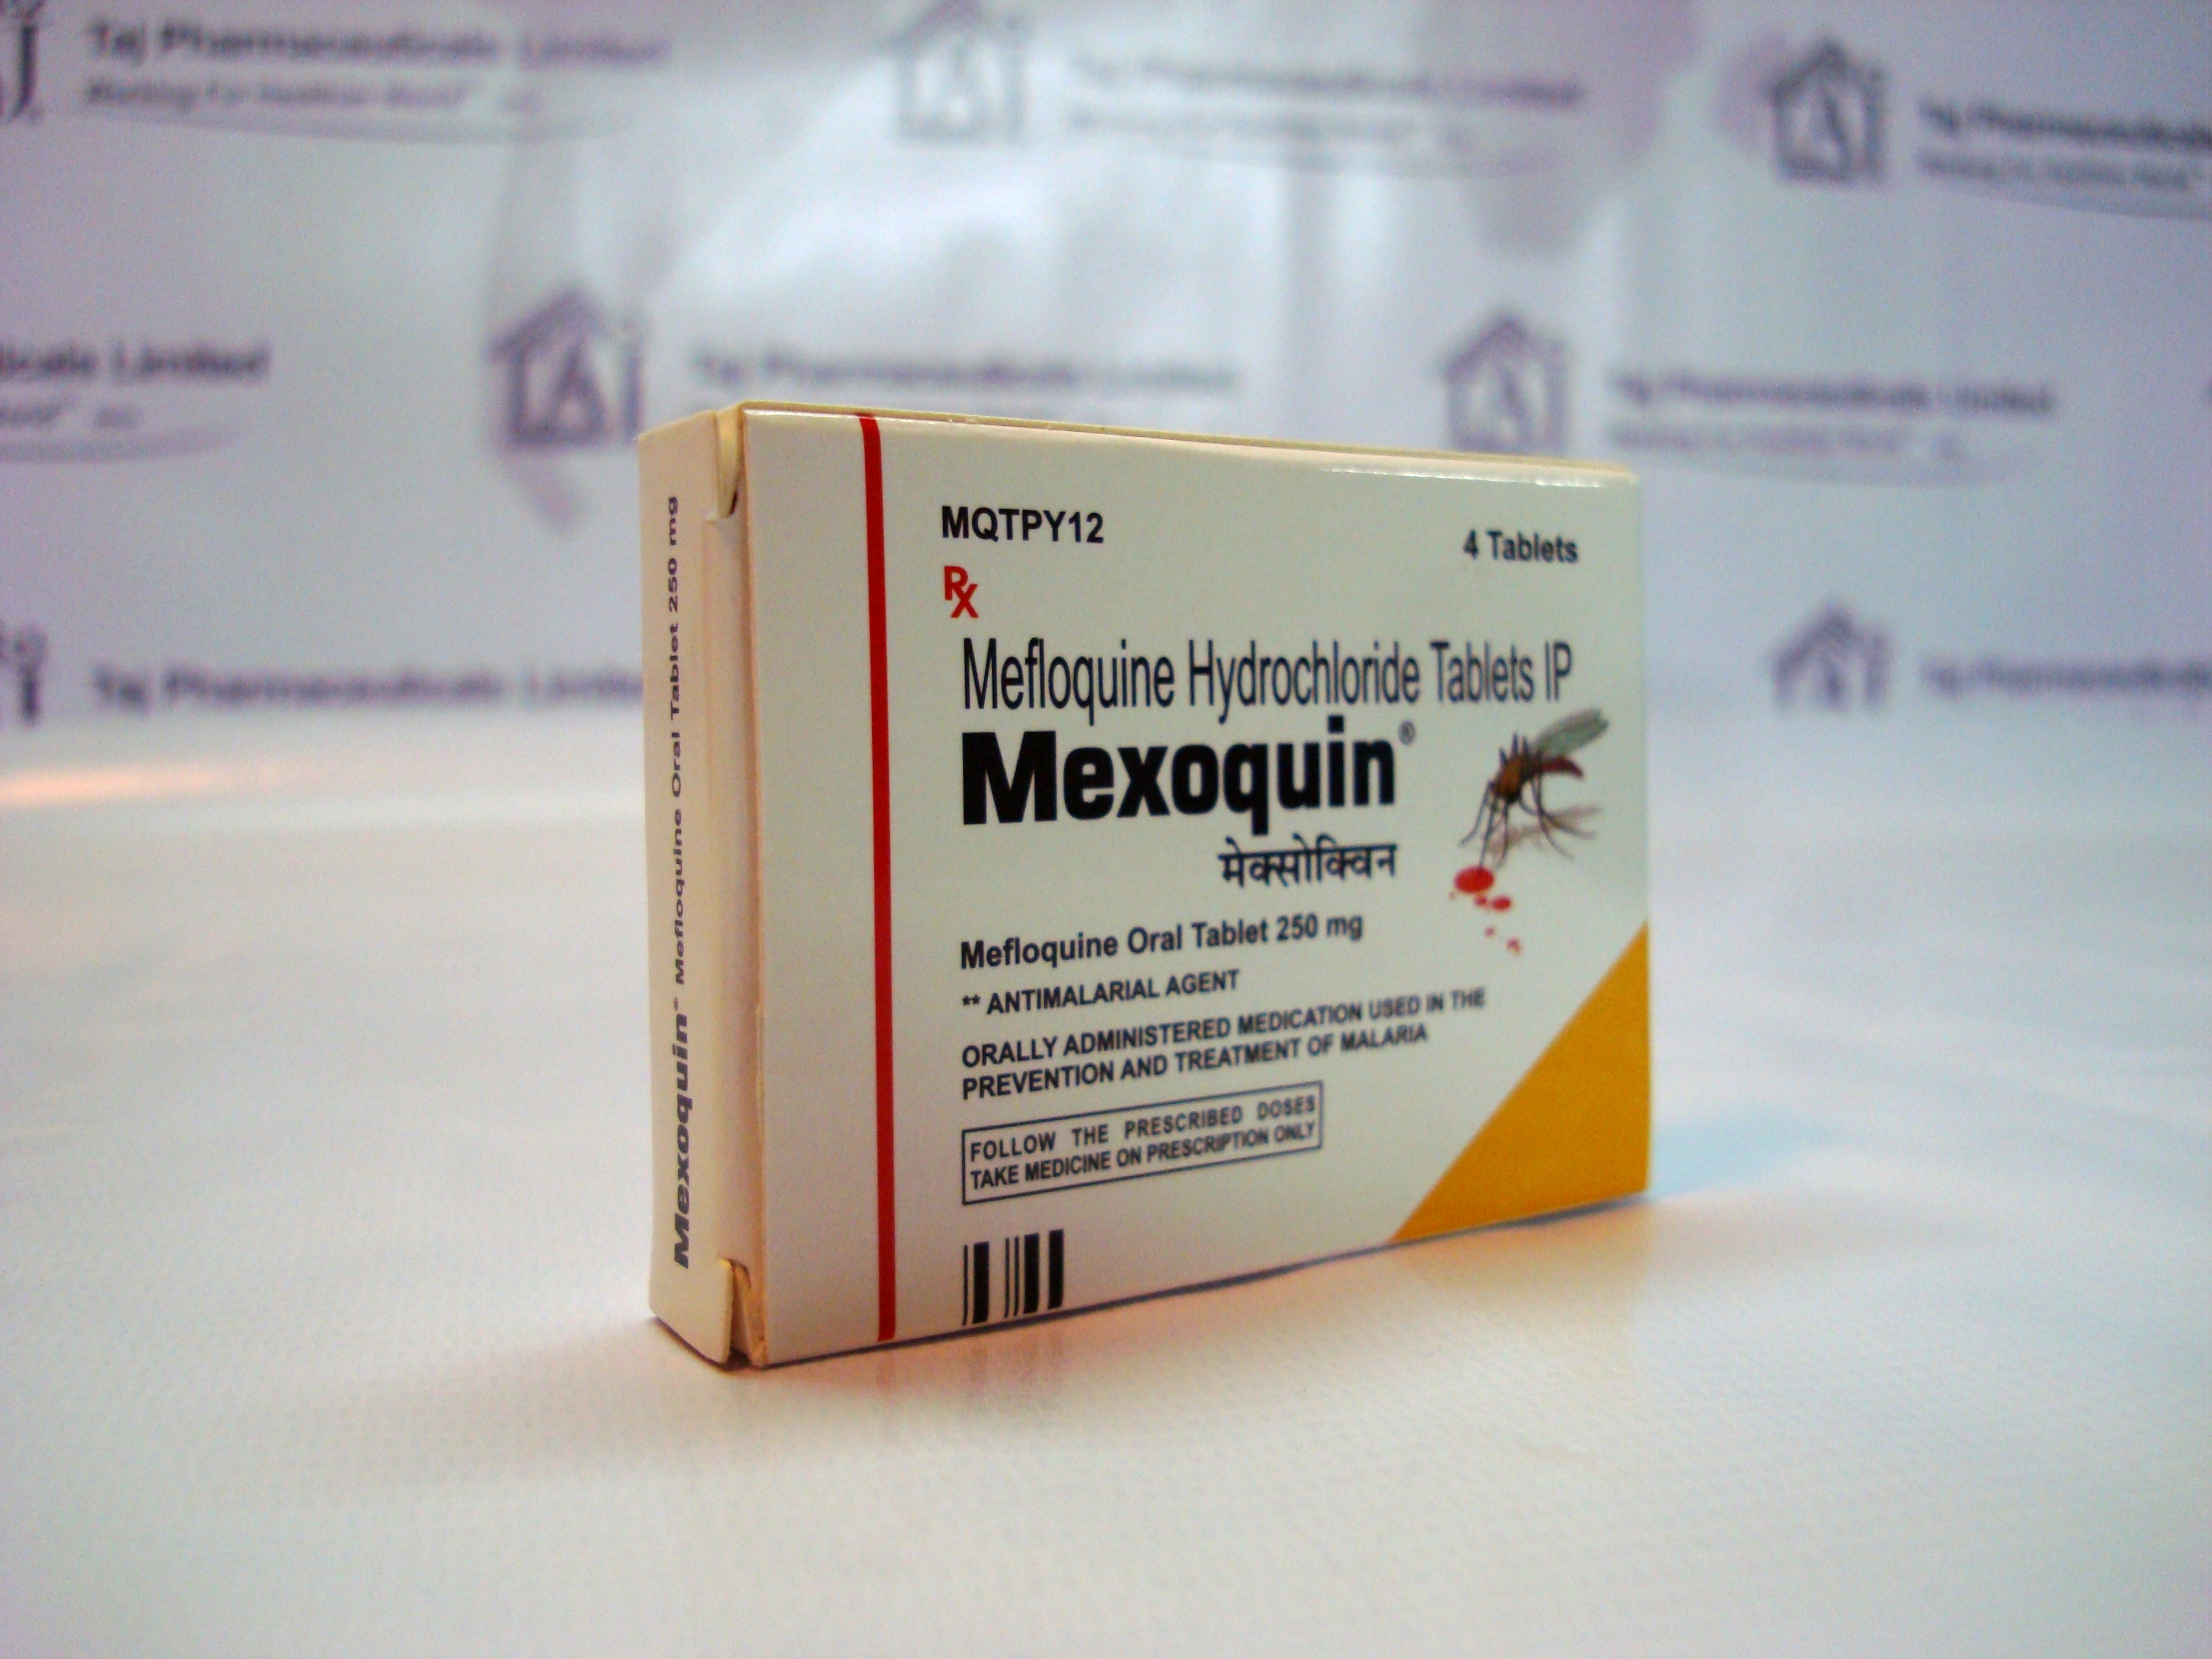 Mefloquine%20Hydrochloride%20Tablets%20m